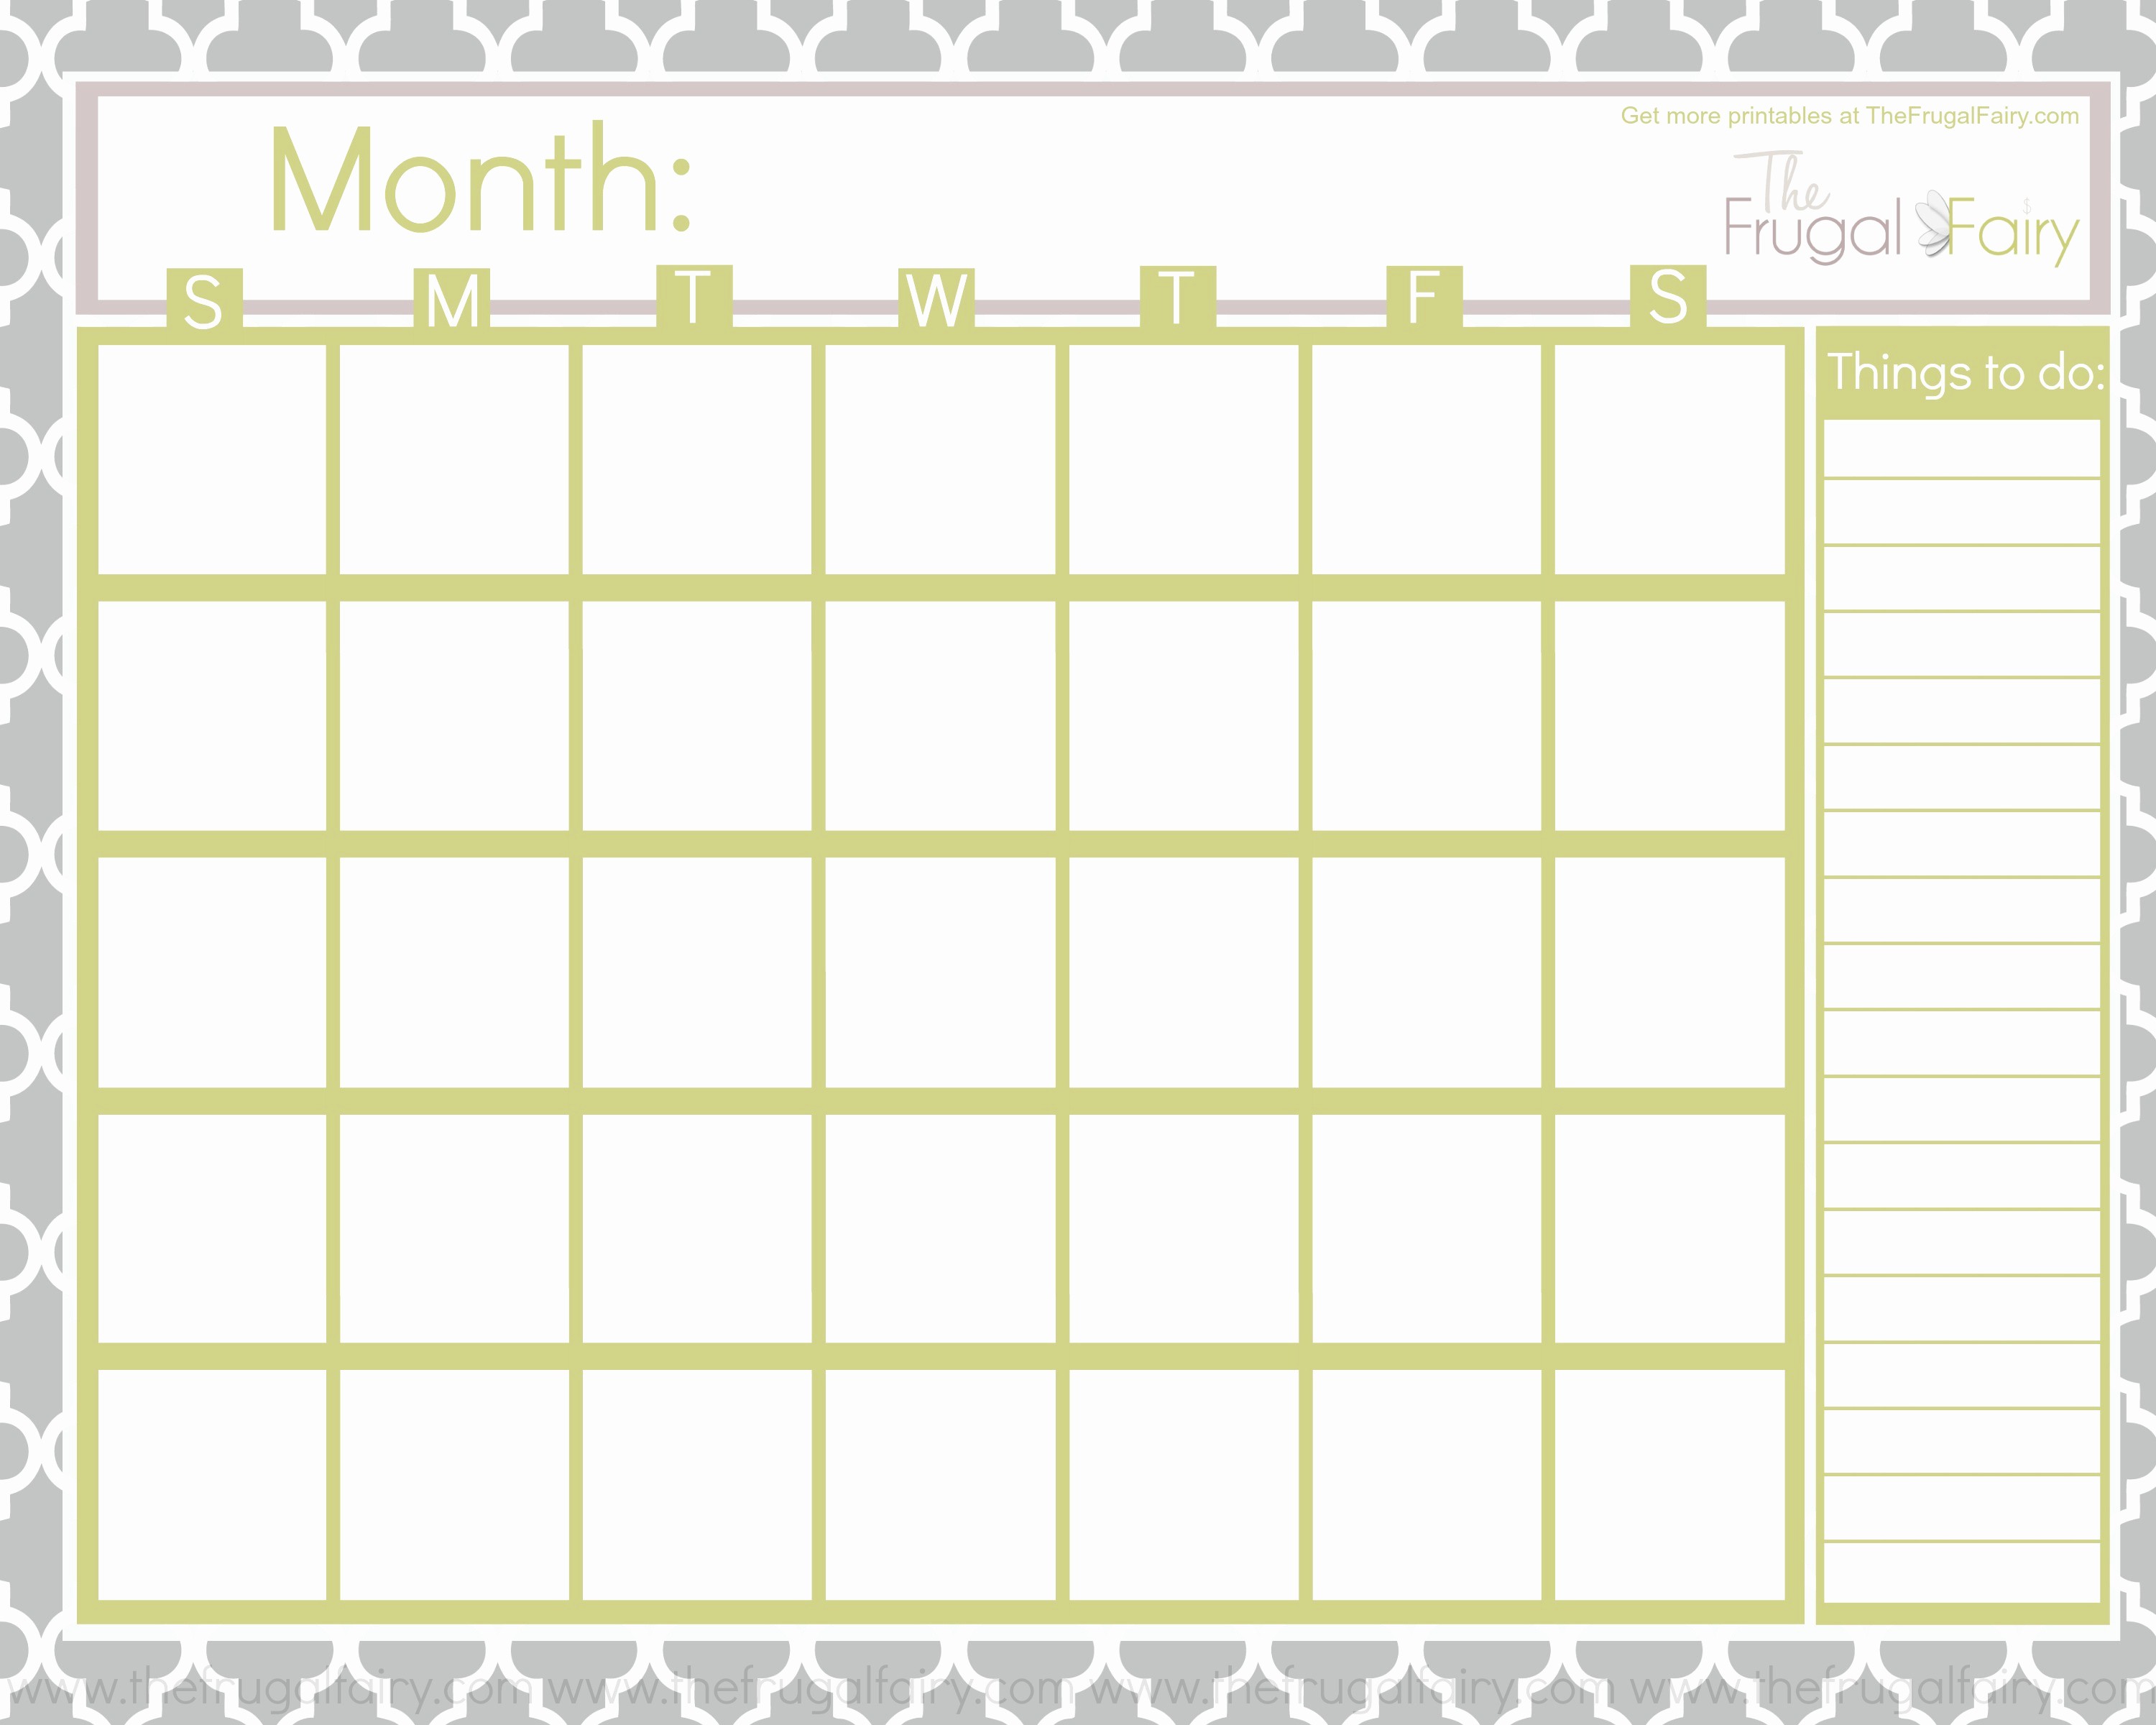 Blank Calendar to Fill In Awesome Blank July 2015 Calendar to Print